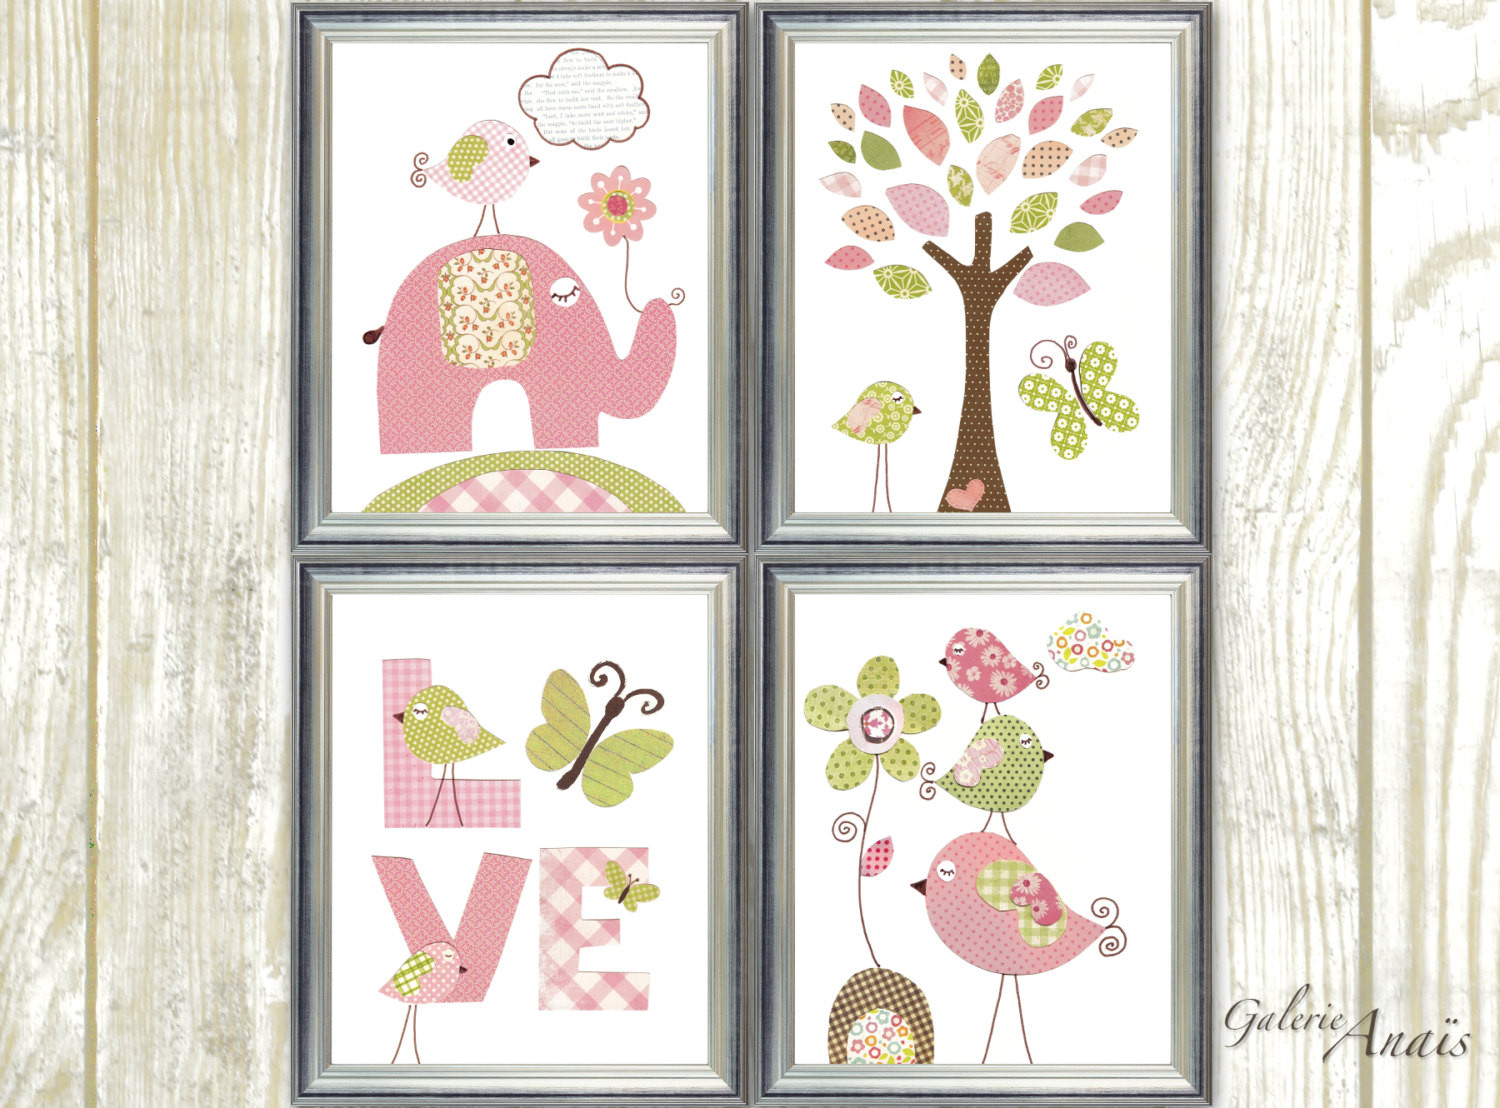 Butterfly Baby Room Wall Decor
 Baby room Decor Butterfly nursery wall art Baby Girl Nursery